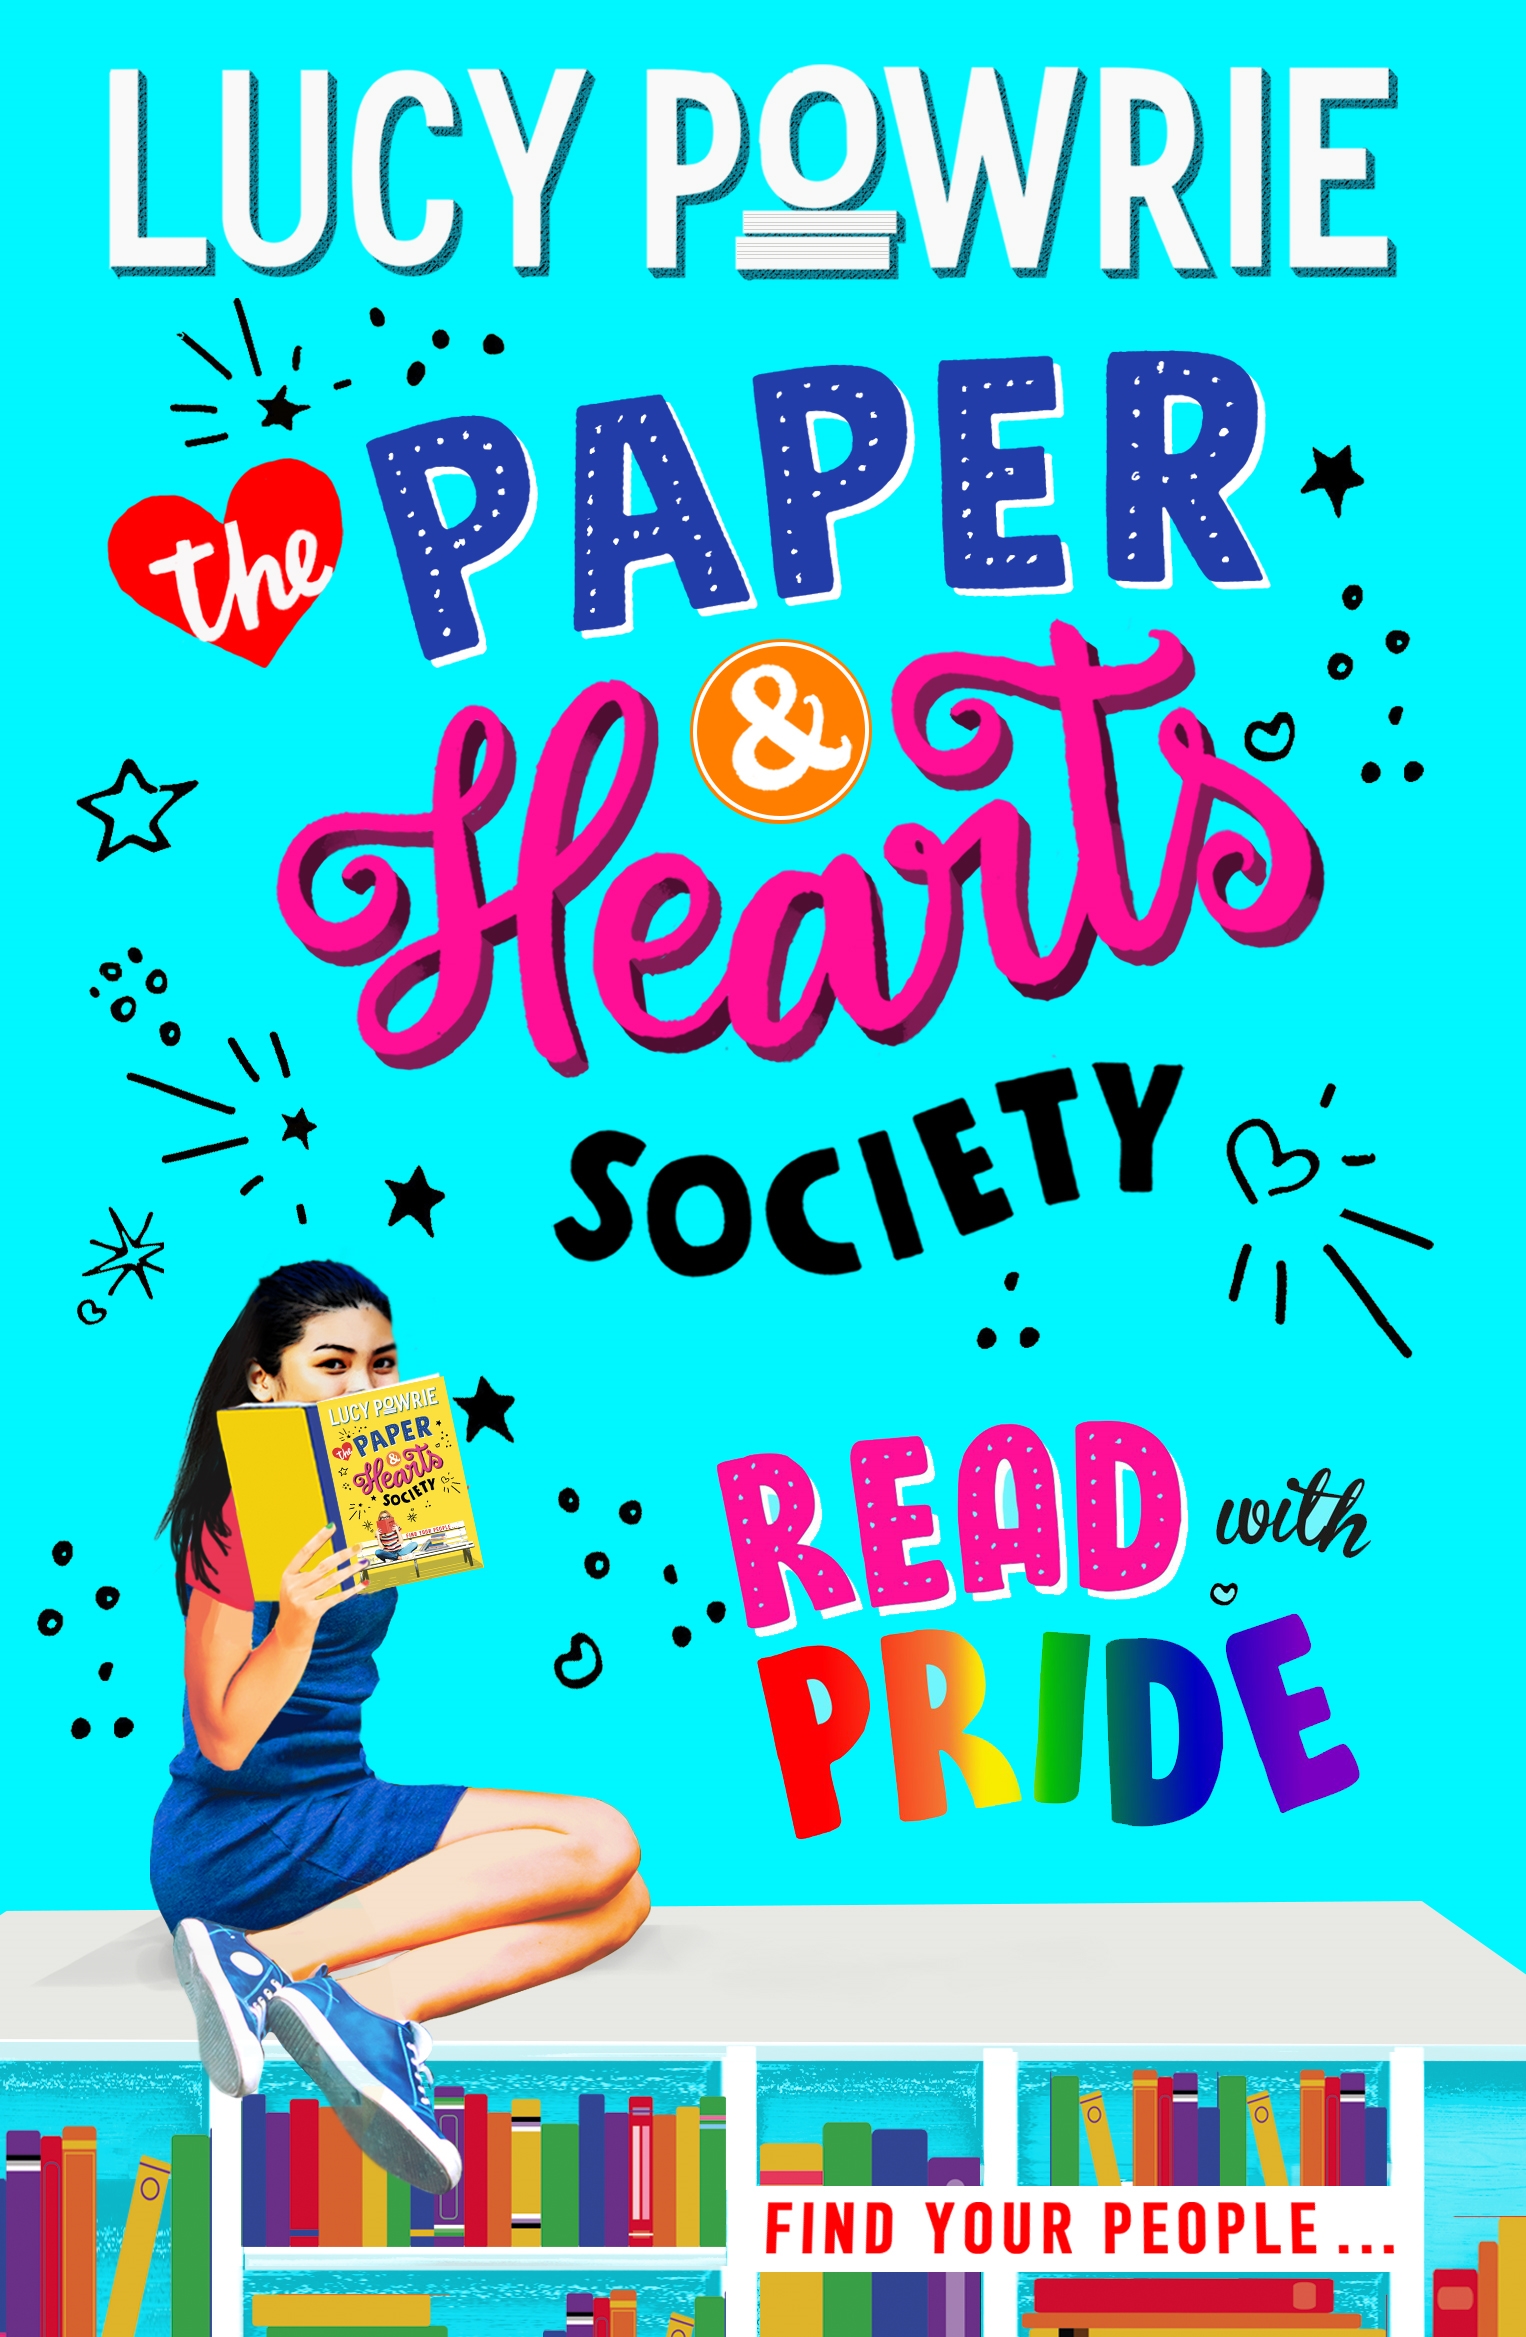 The Paper & Hearts Society by Lucy Powrie